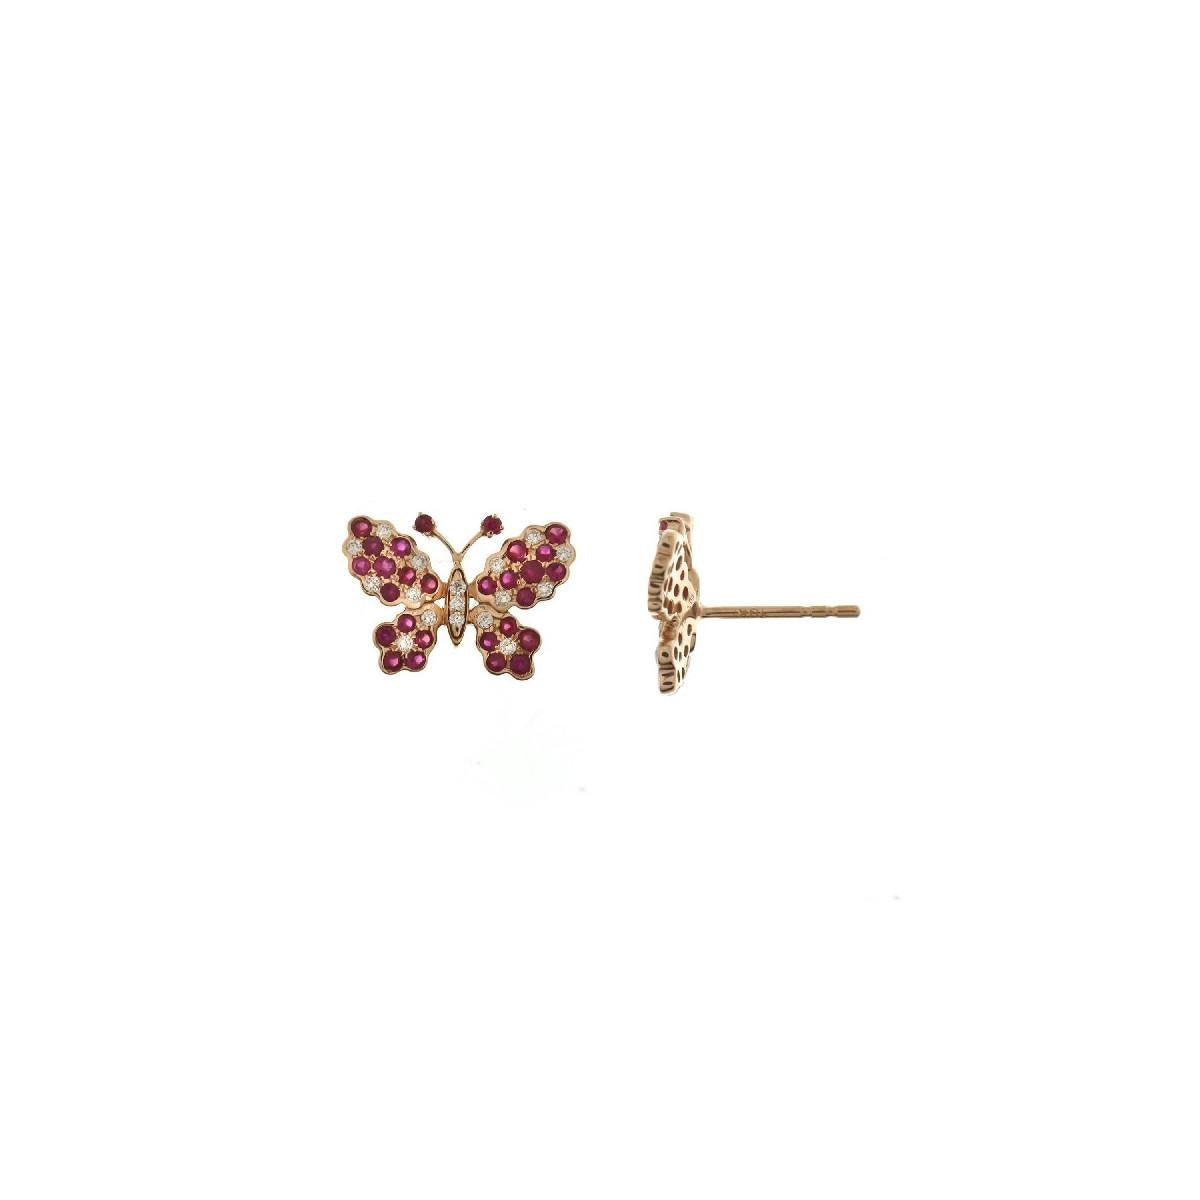 Diamonds, Ruby & 18K Gold Butterfly Earrings
Butterfly Collection... everyday wearable botanical pieces 
Irama Pradera is a dynamic and outgoing designer from Spain that searches always for the best gems and combines classic with contemporary